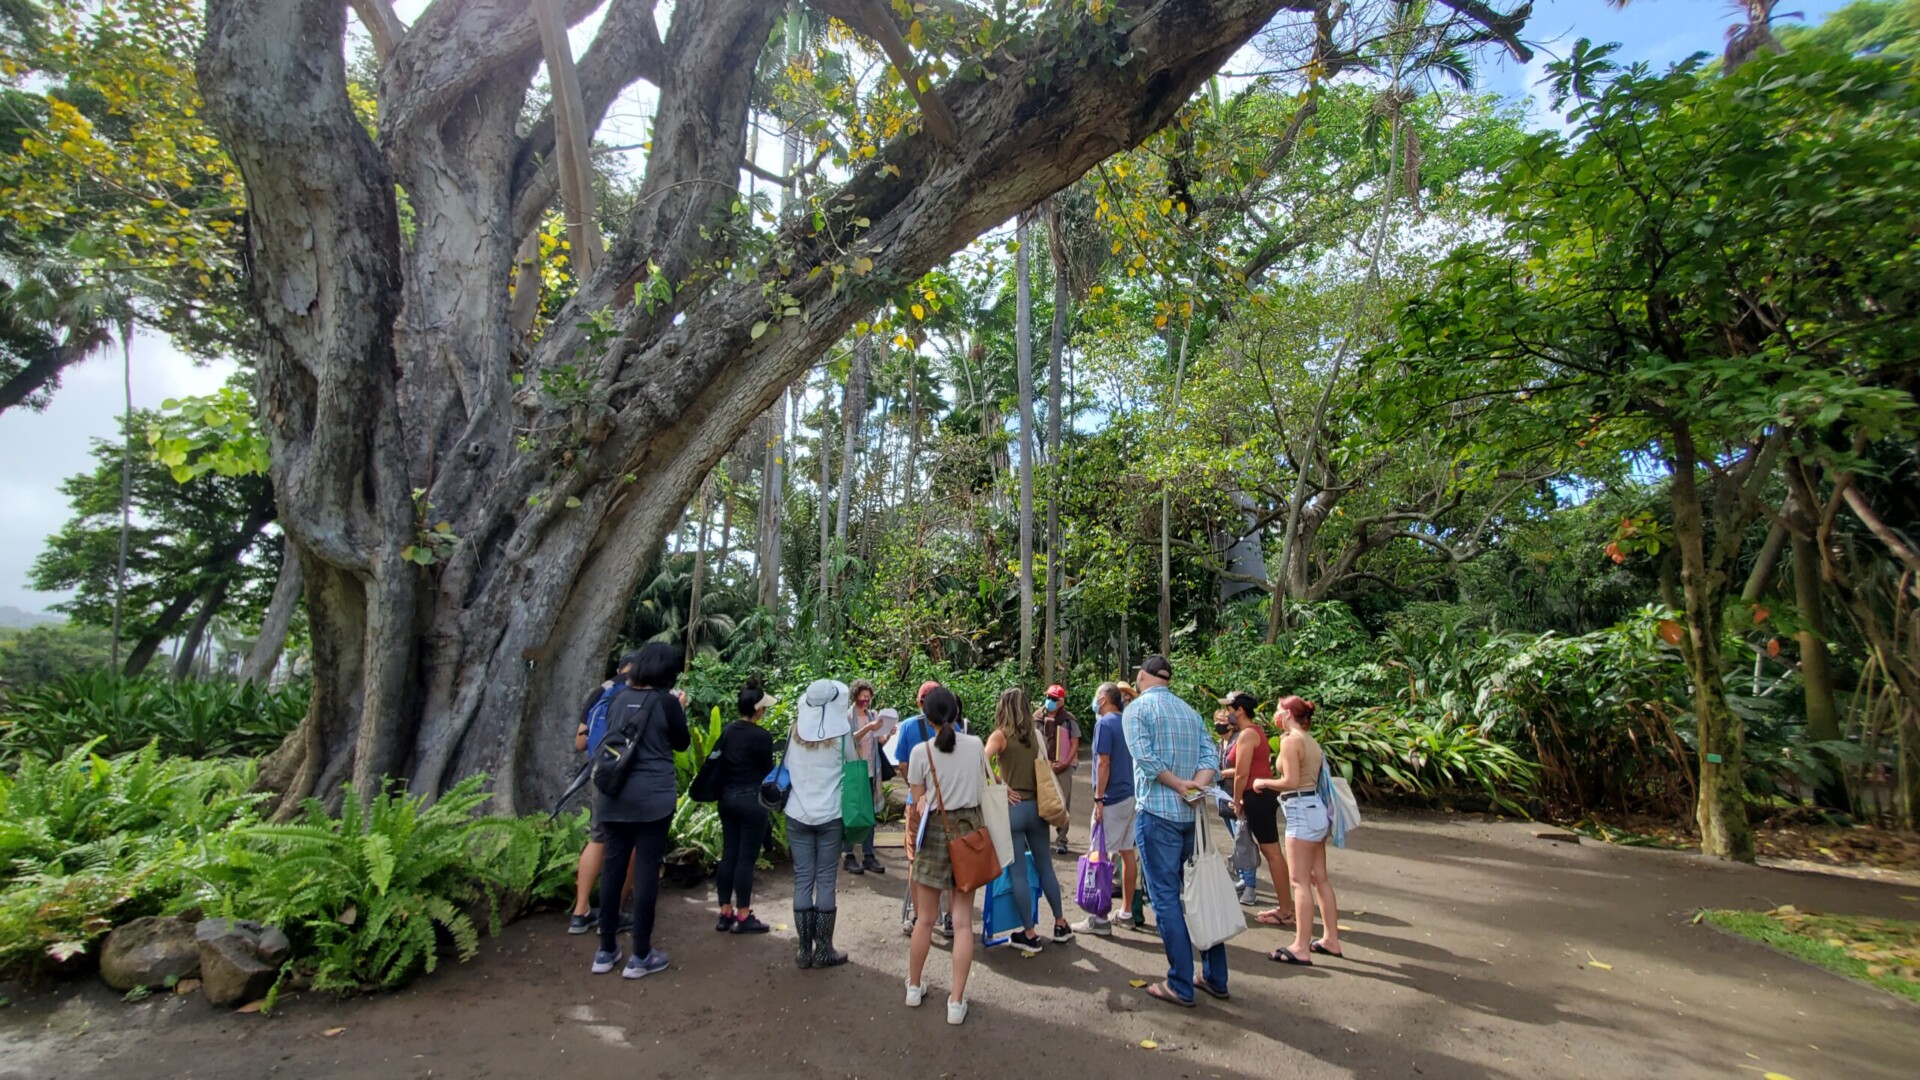 Photo Gallery Of Hhfs Sketching Event At Foster Botanical Garden Historic Hawaii Foundation